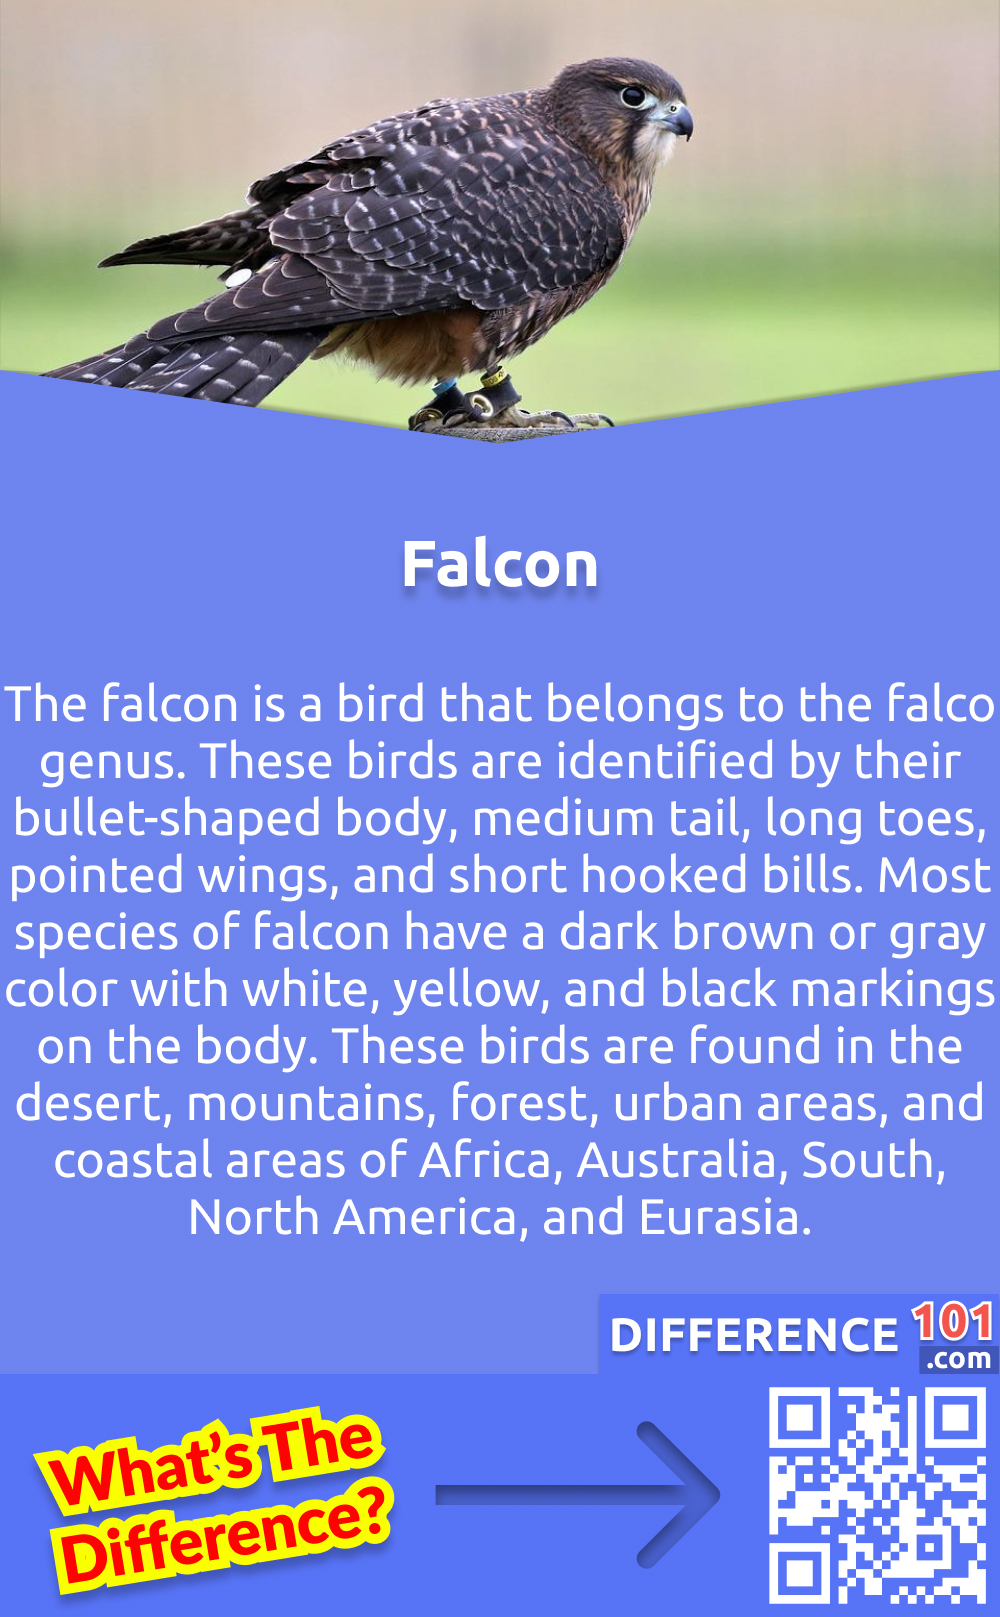 What is Falcon? The falcon is a bird that belongs to the falco genus. These birds are identified by their bullet-shaped body, medium tail, long toes, pointed wings, and short hooked bills. Most species of falcon have a dark brown or gray color with white, yellow, and black markings on the body. These birds are found in the desert, mountains, forest, urban areas, and coastal areas of Africa, Australia, South, North America, and Eurasia.